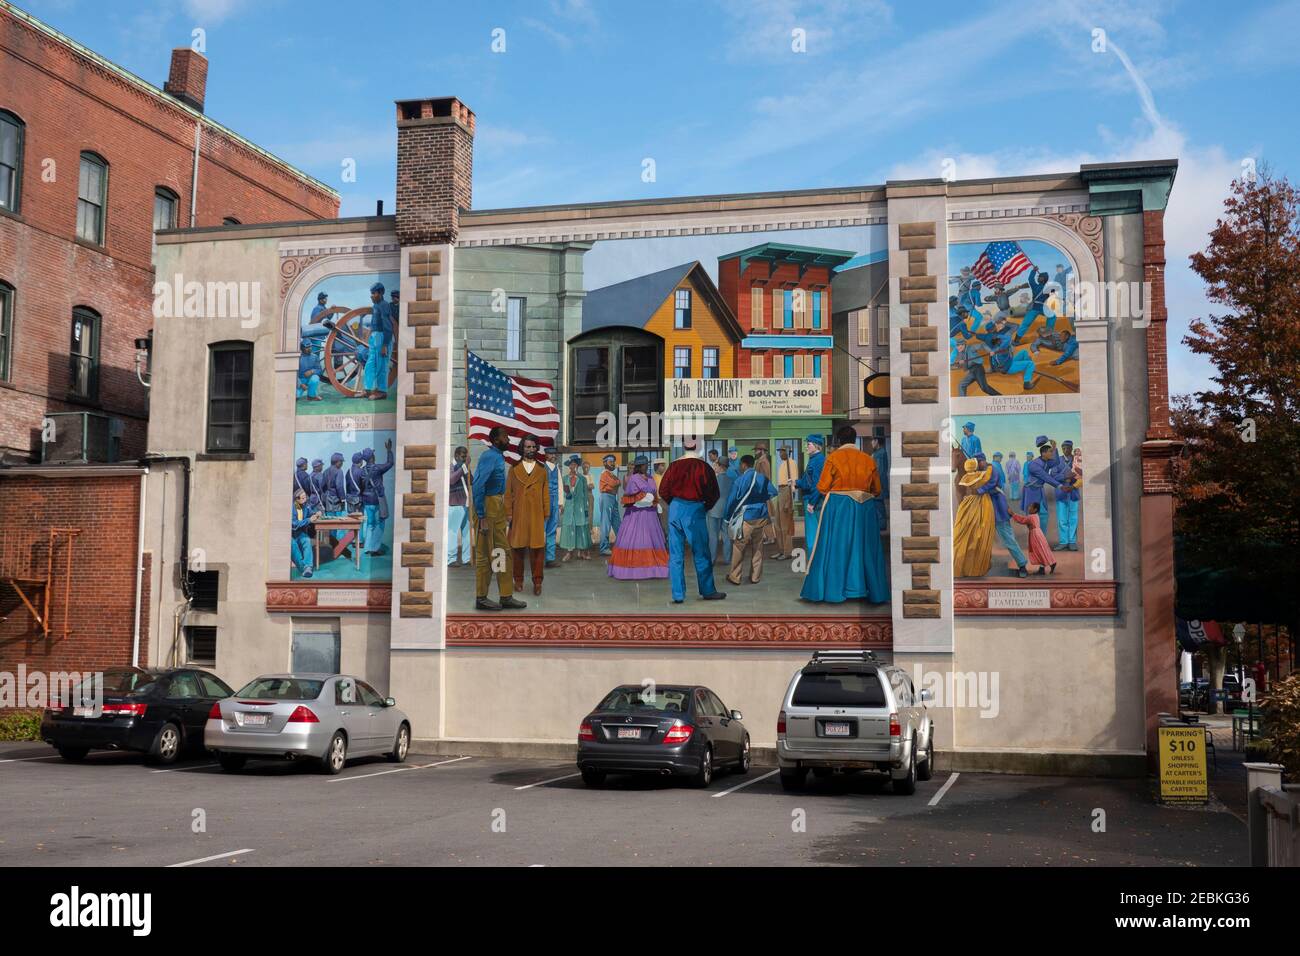 Fifty Fourth Massachusetts volunteer infantry regiment mural in New Bedford MA Stock Photo